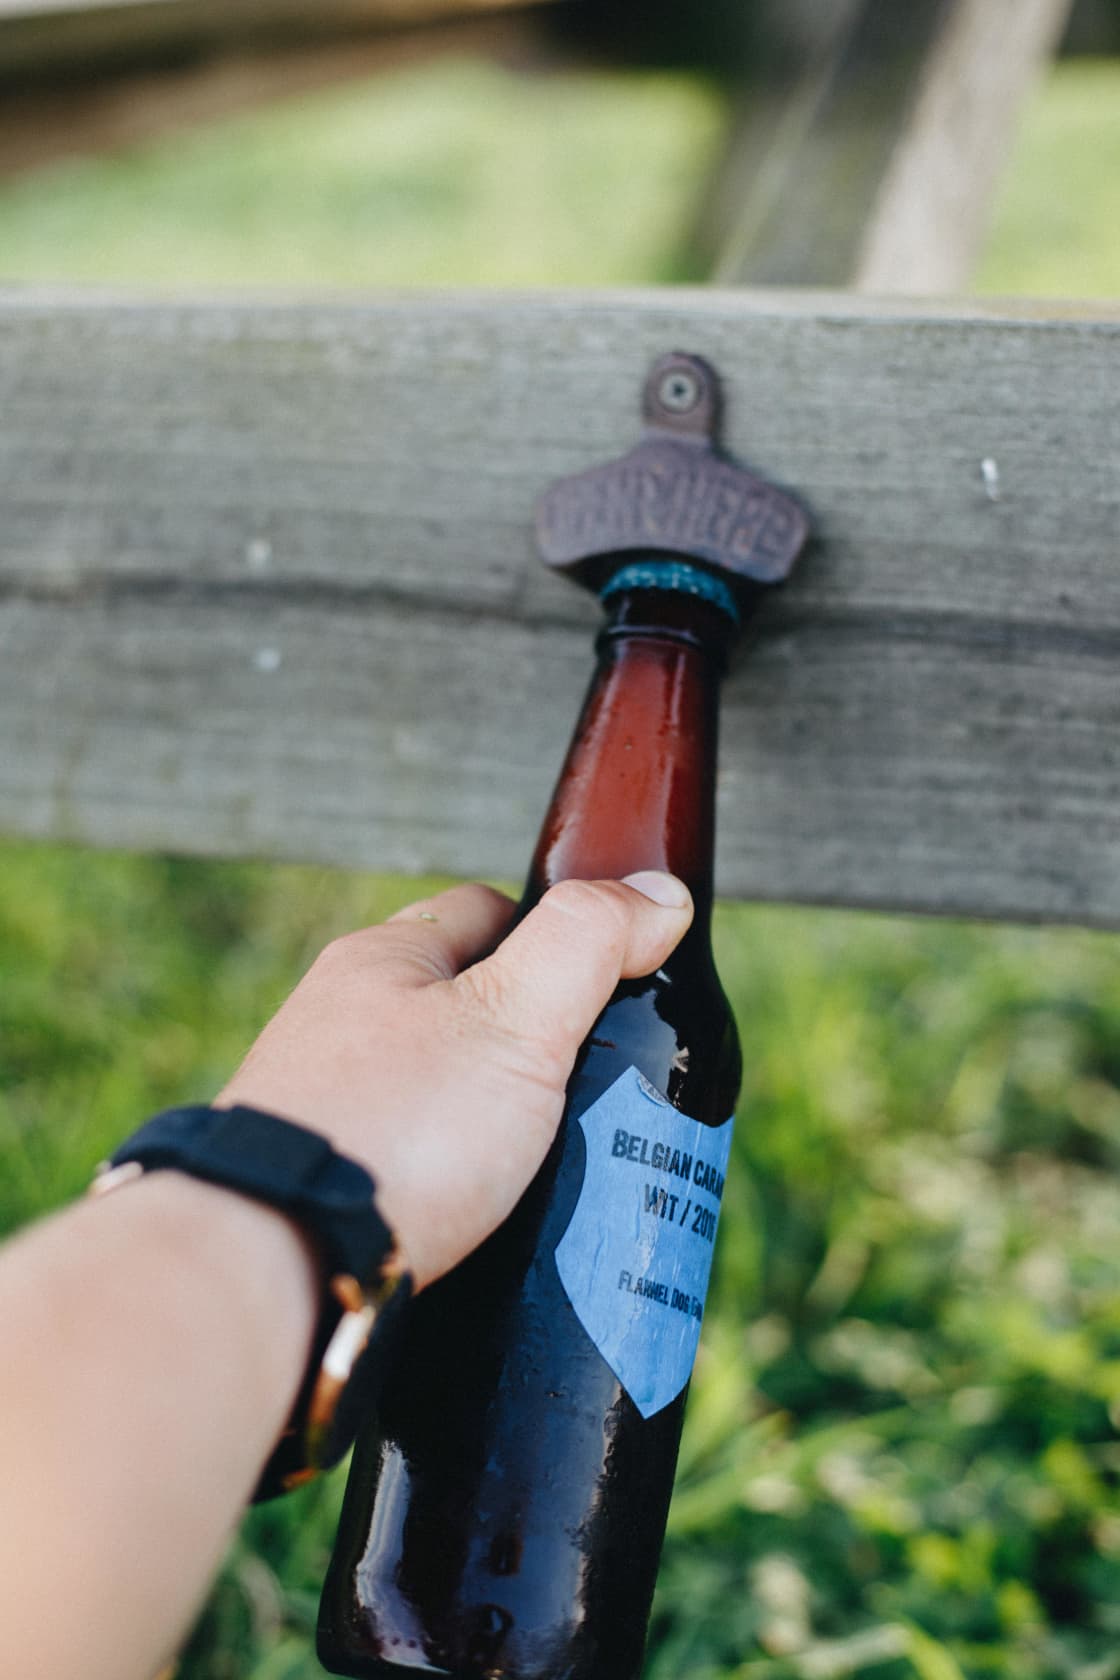 don't worry if you forget a bottle opener, they've got one right on their picnic table